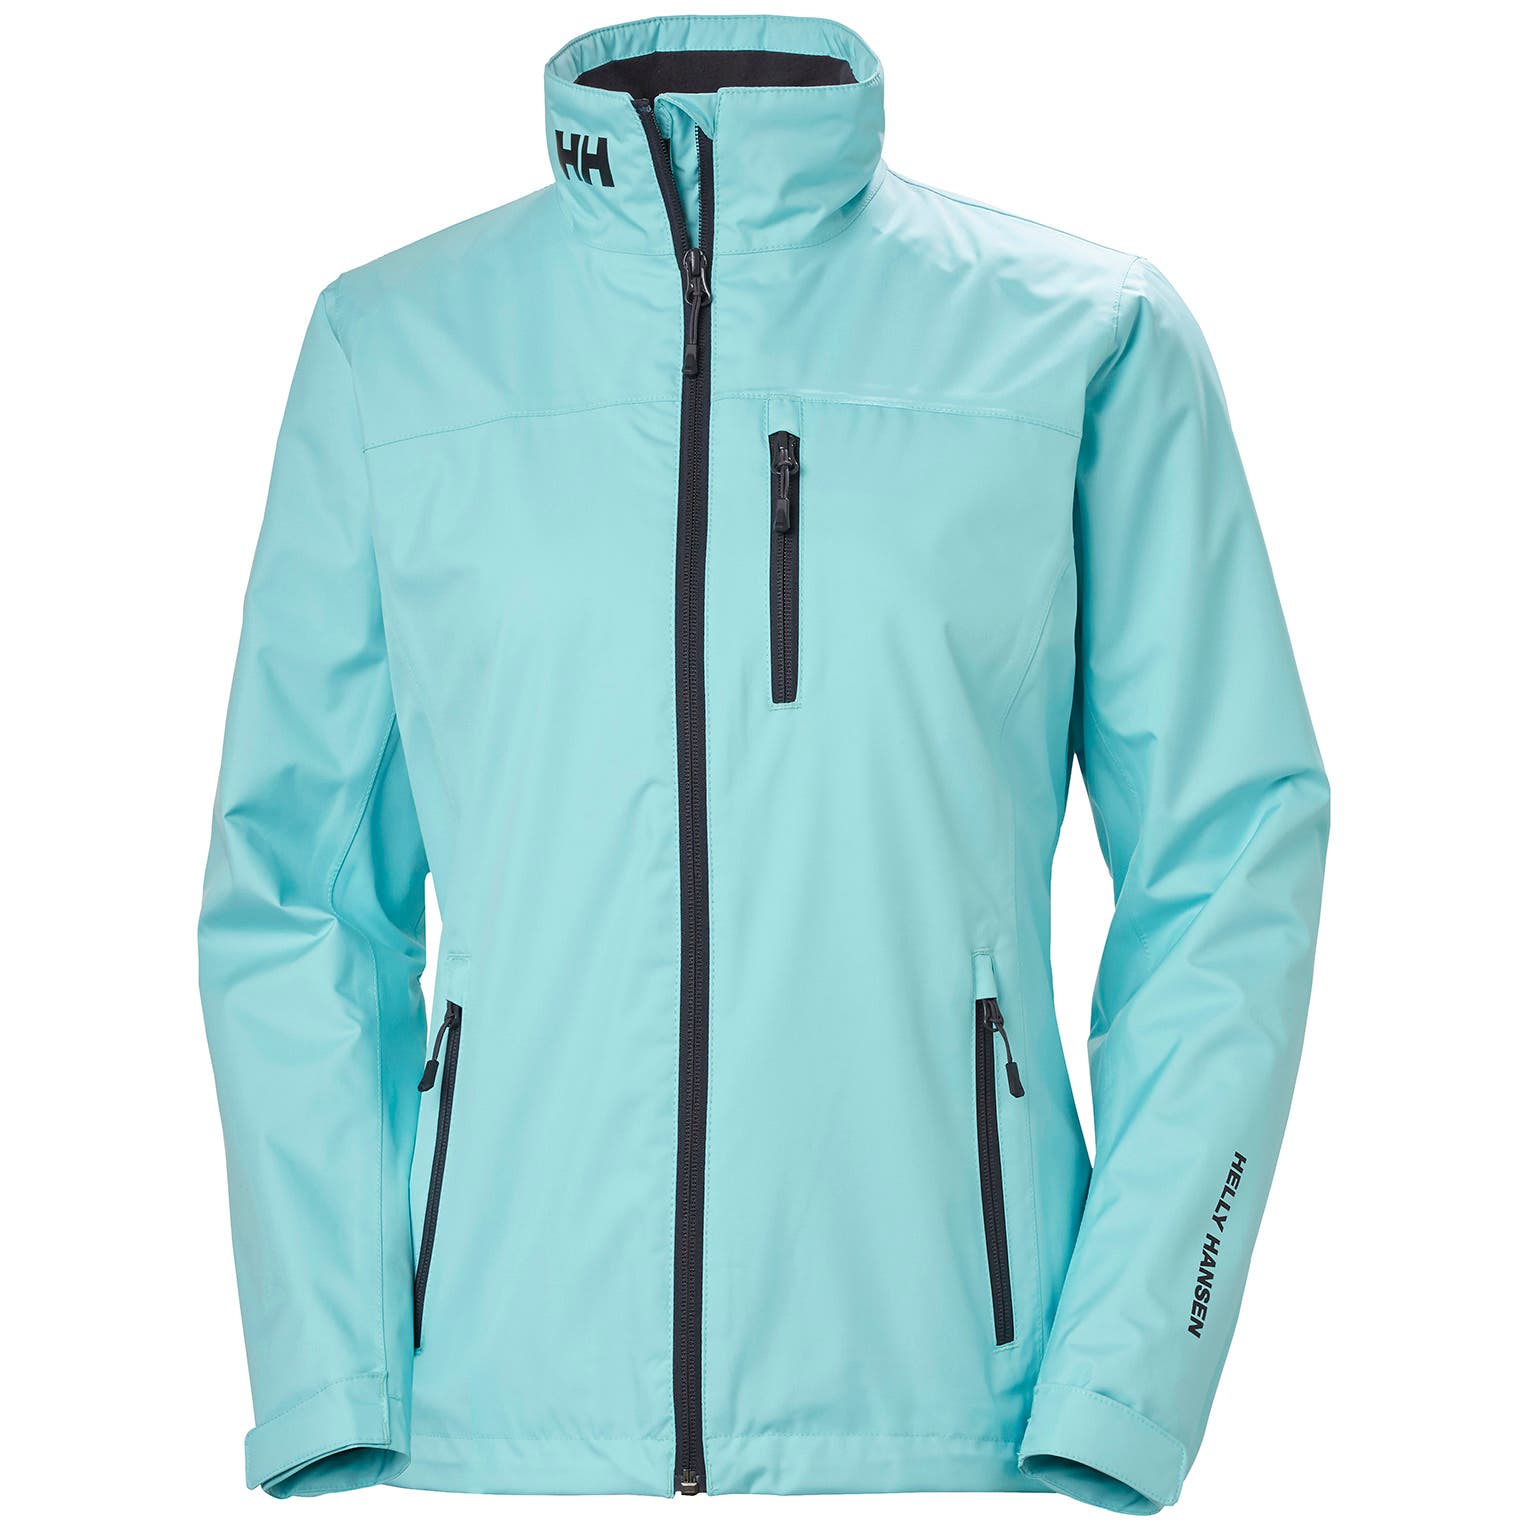 Helly Hansen Women's Crew Midlayer Jacket in Glacier Blue from the front